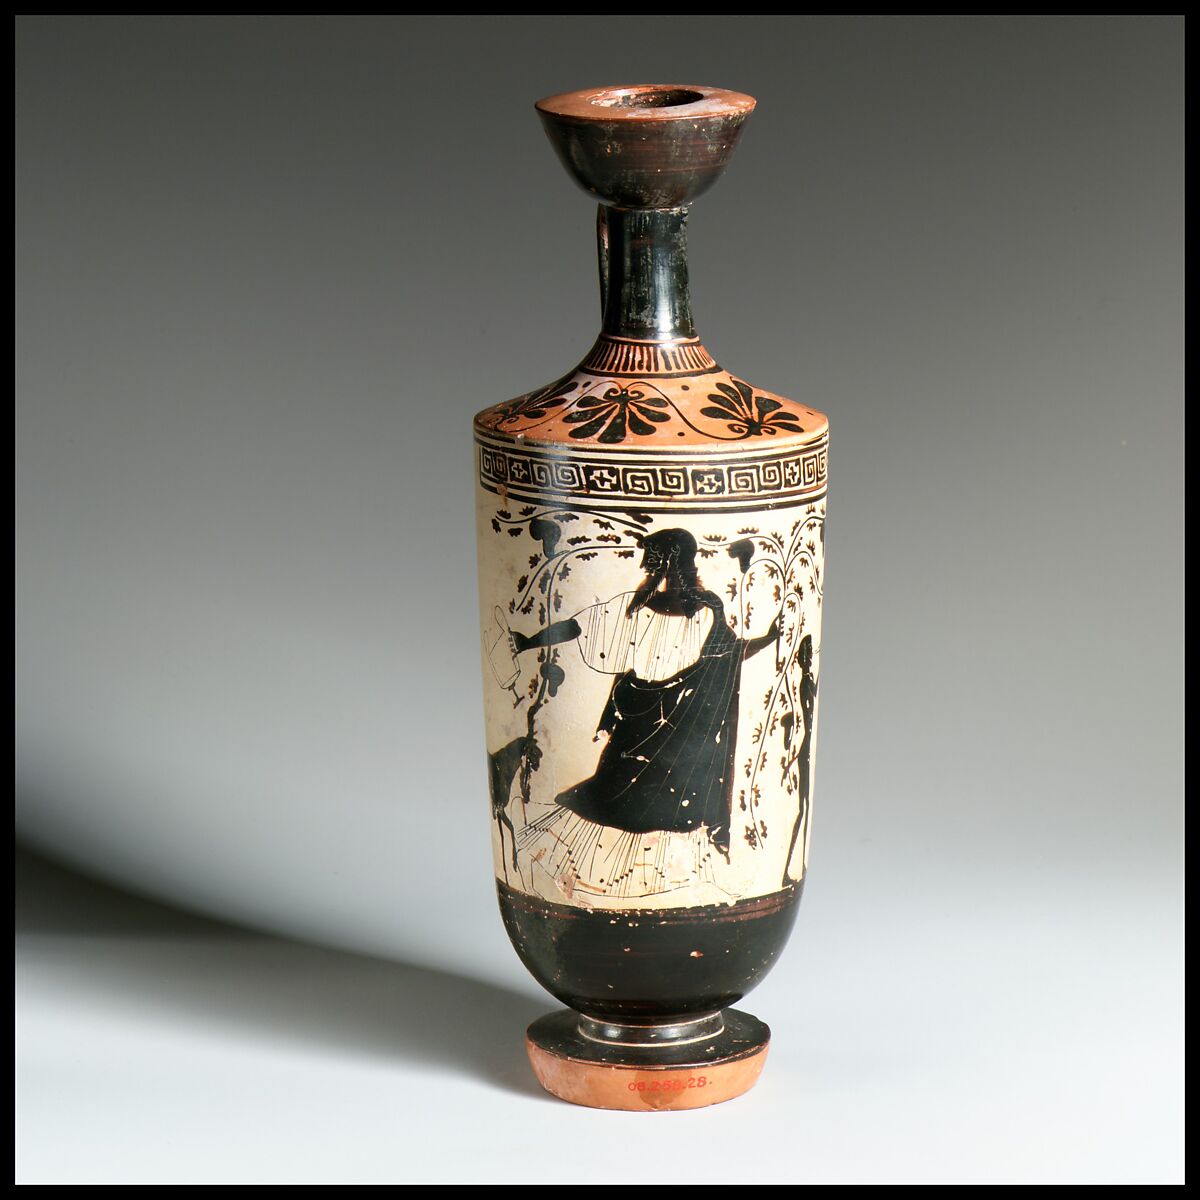 Terracotta lekythos (oil flask), Attributed to the Workshop of the Bowdoin Painter, Terracotta, Greek, Attic 